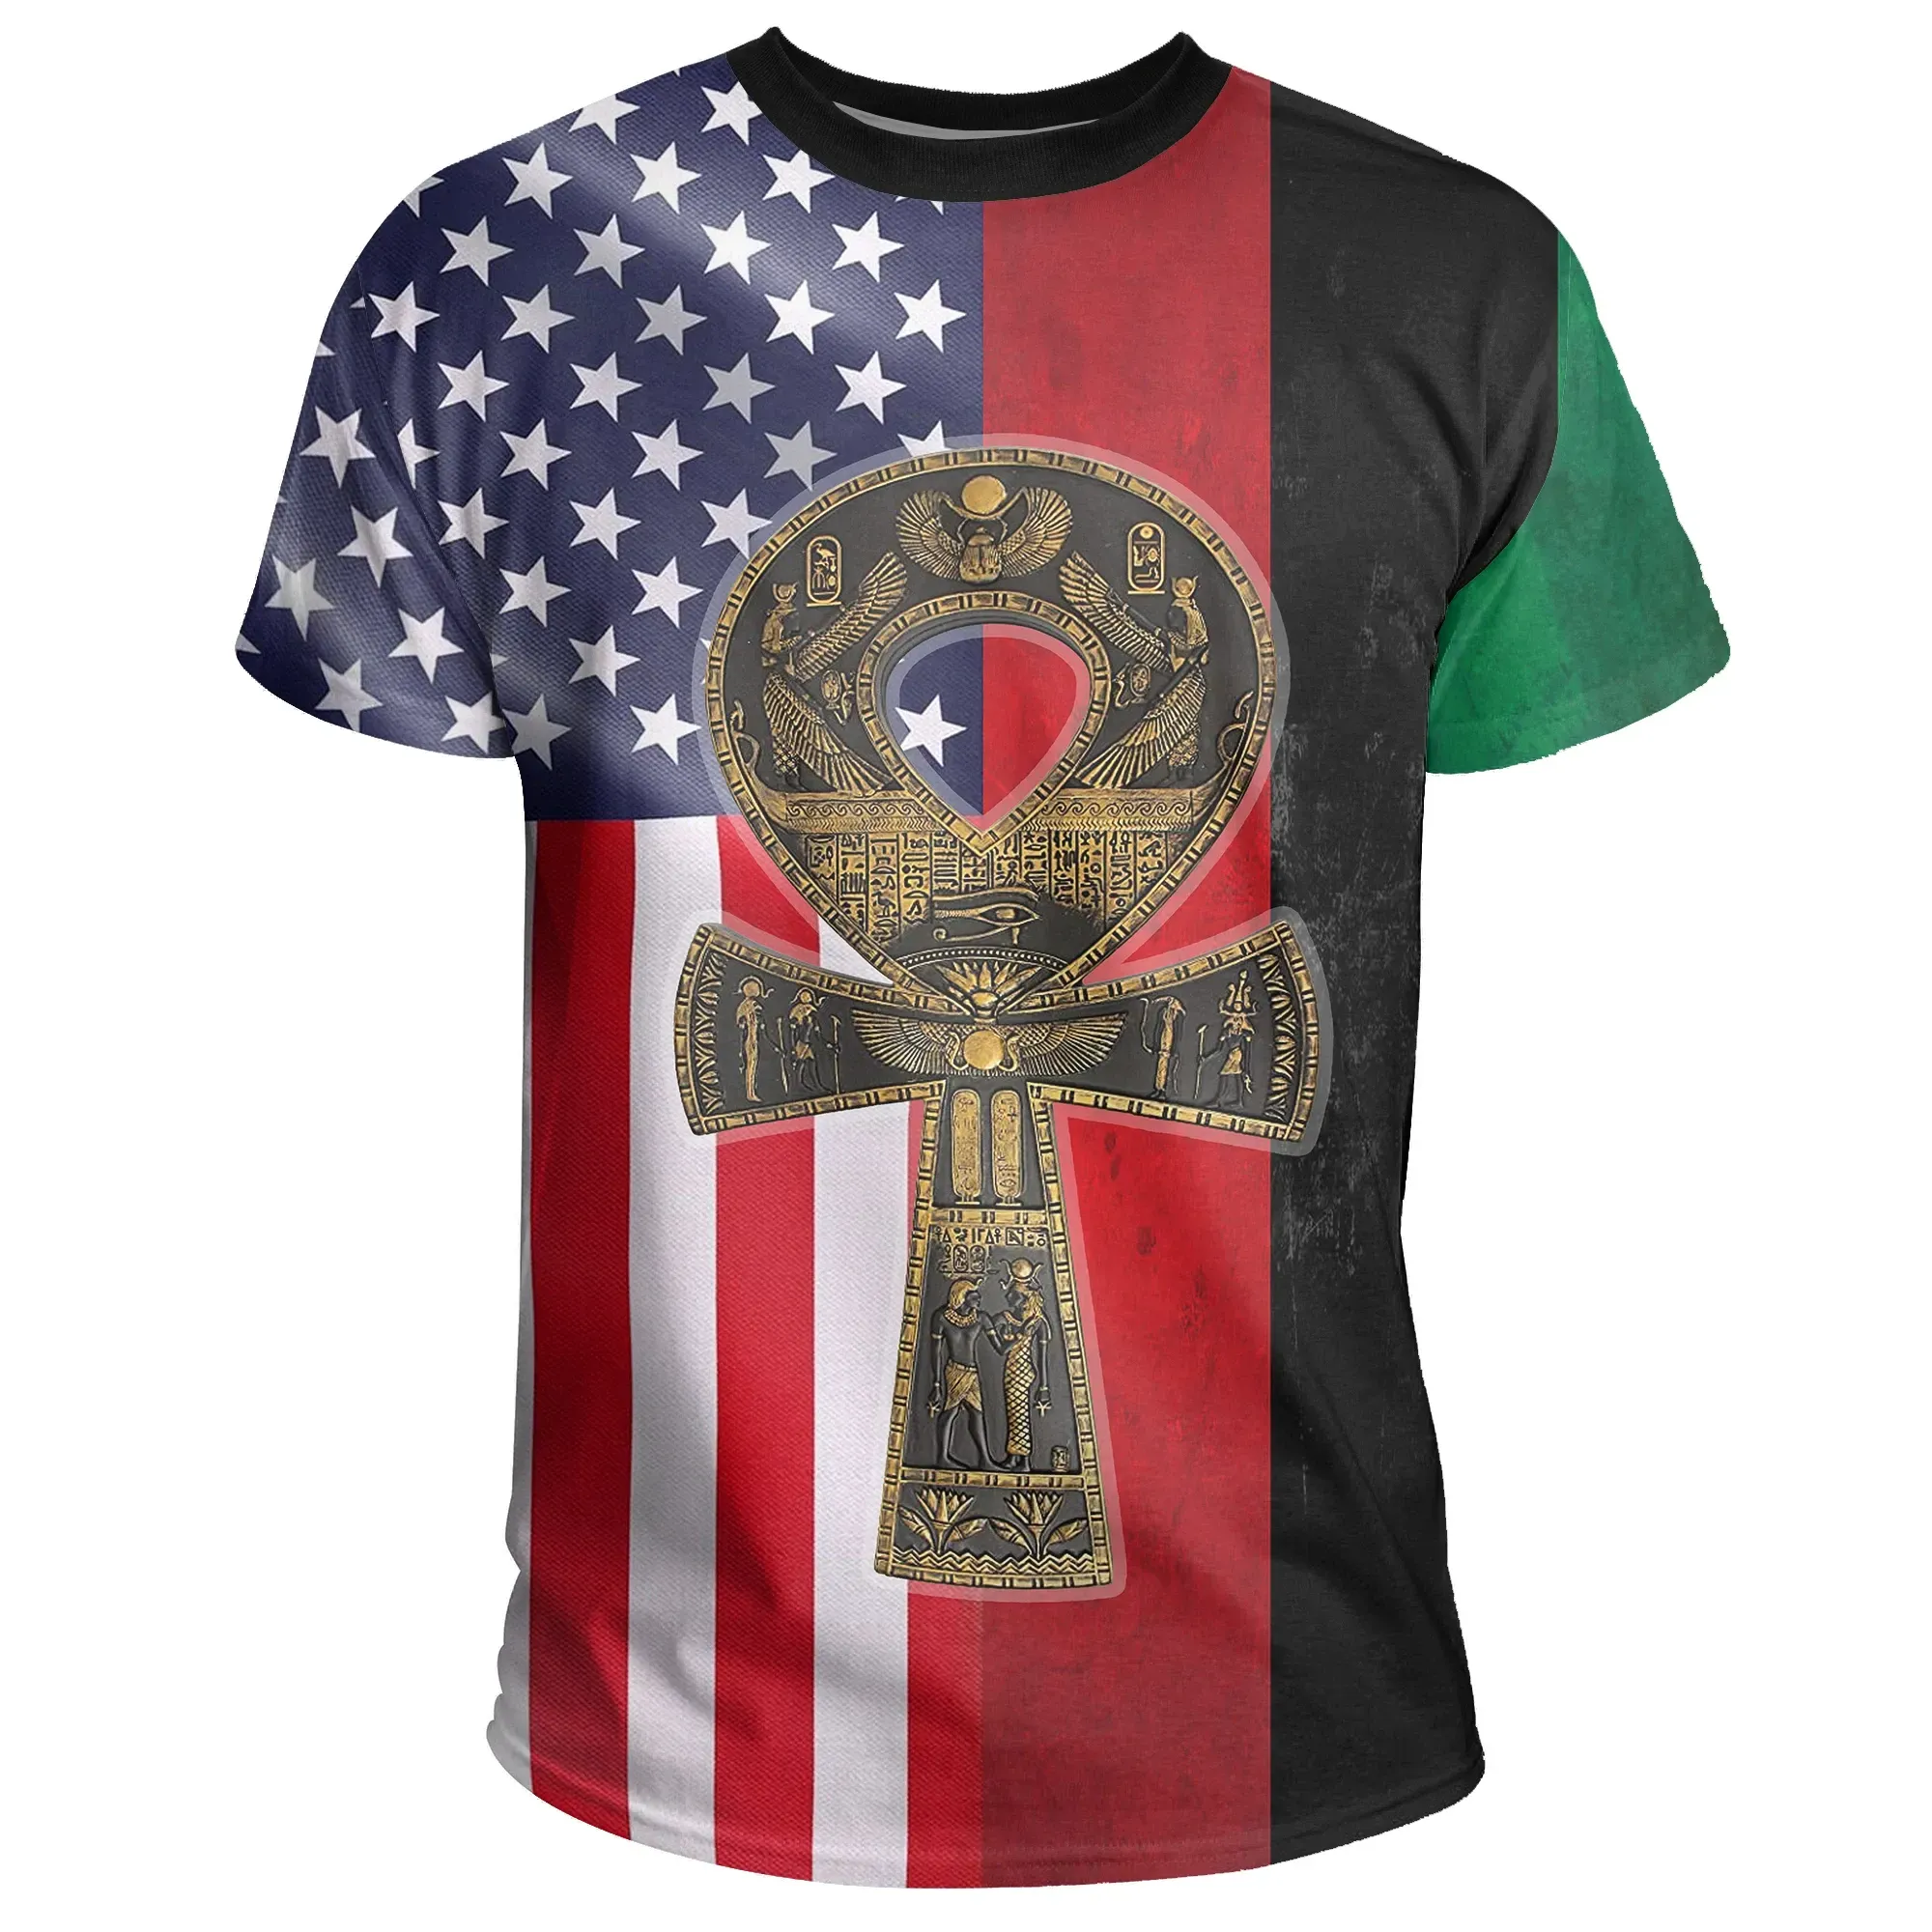 African T-shirt – Ankh Pan African American Tee